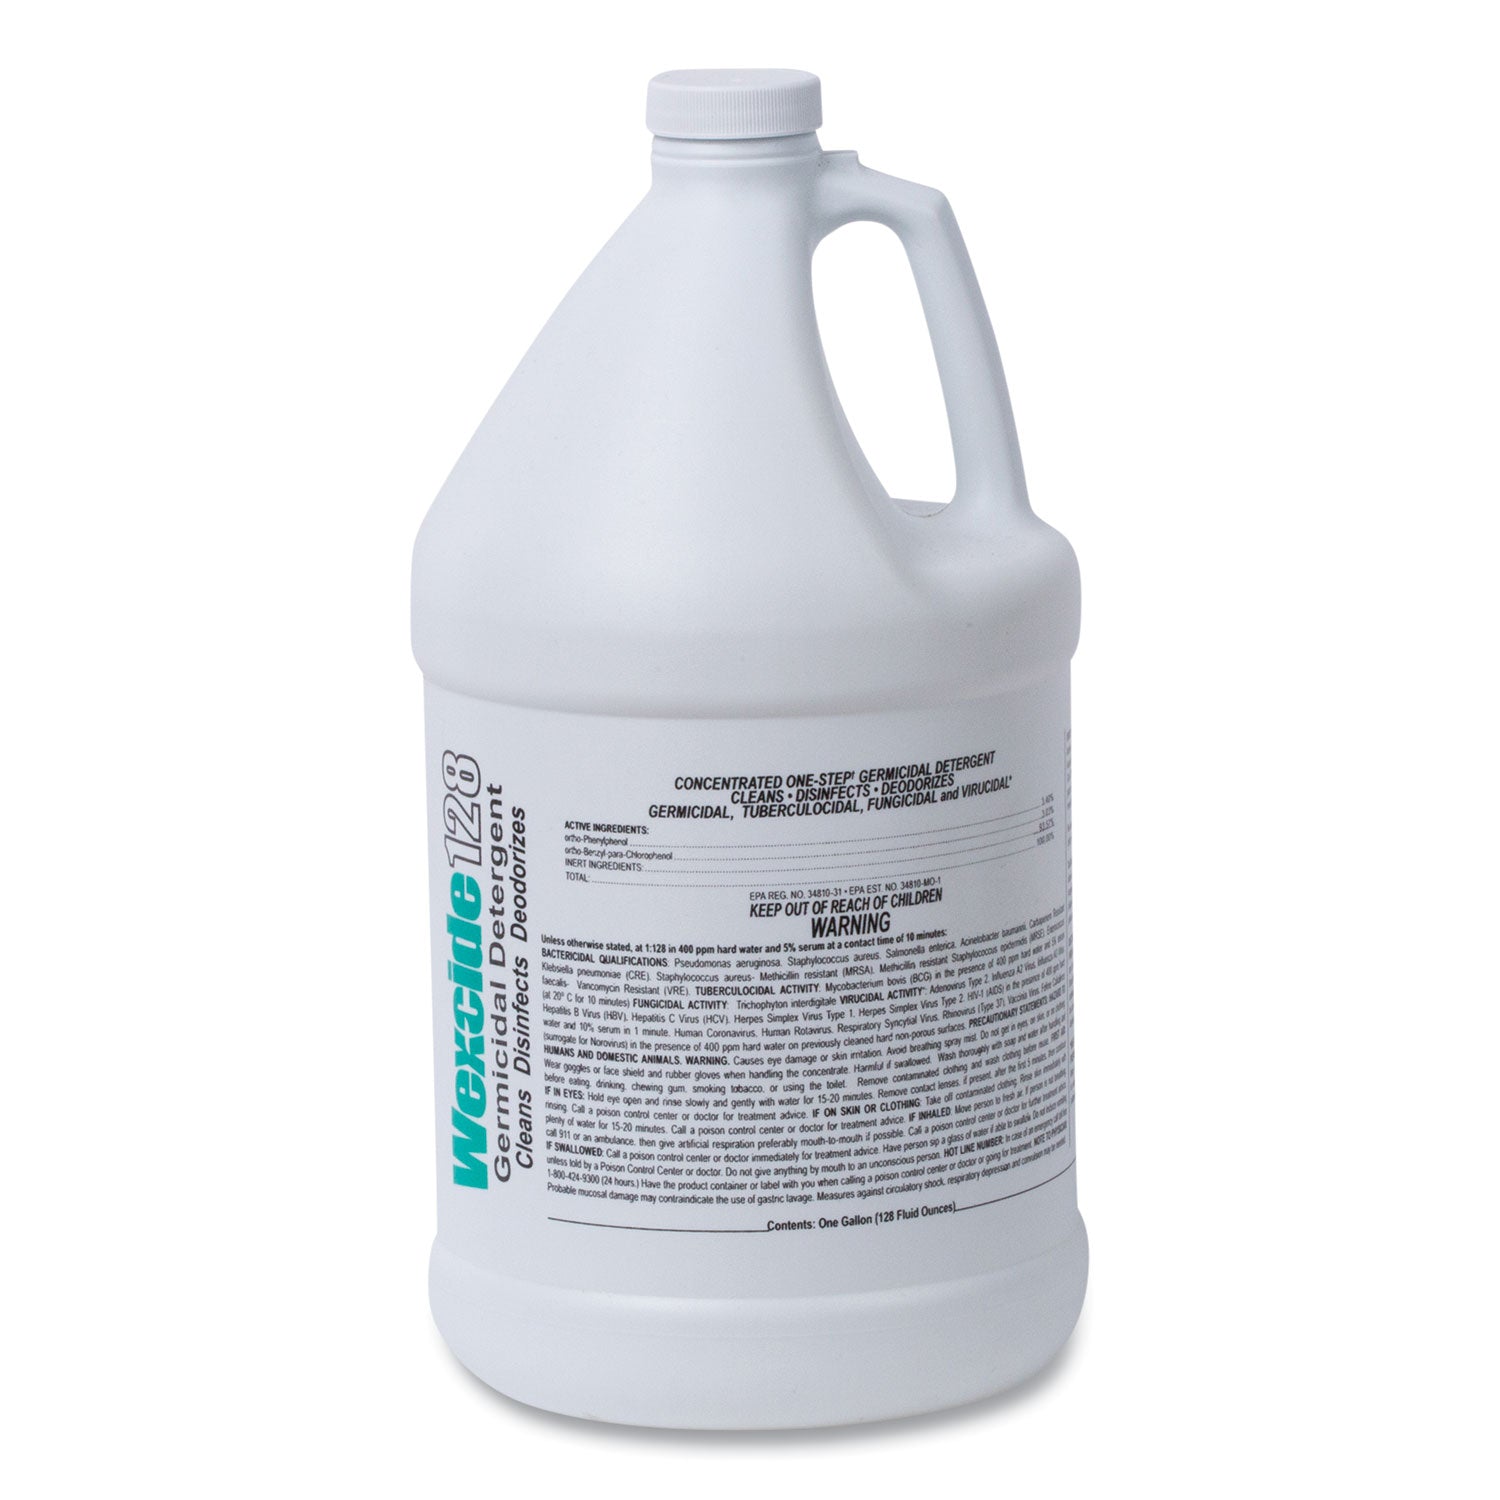 wex-cide-concentrated-disinfecting-cleaner-nectar-scent-128-oz-bottle_wxf211000ea - 1